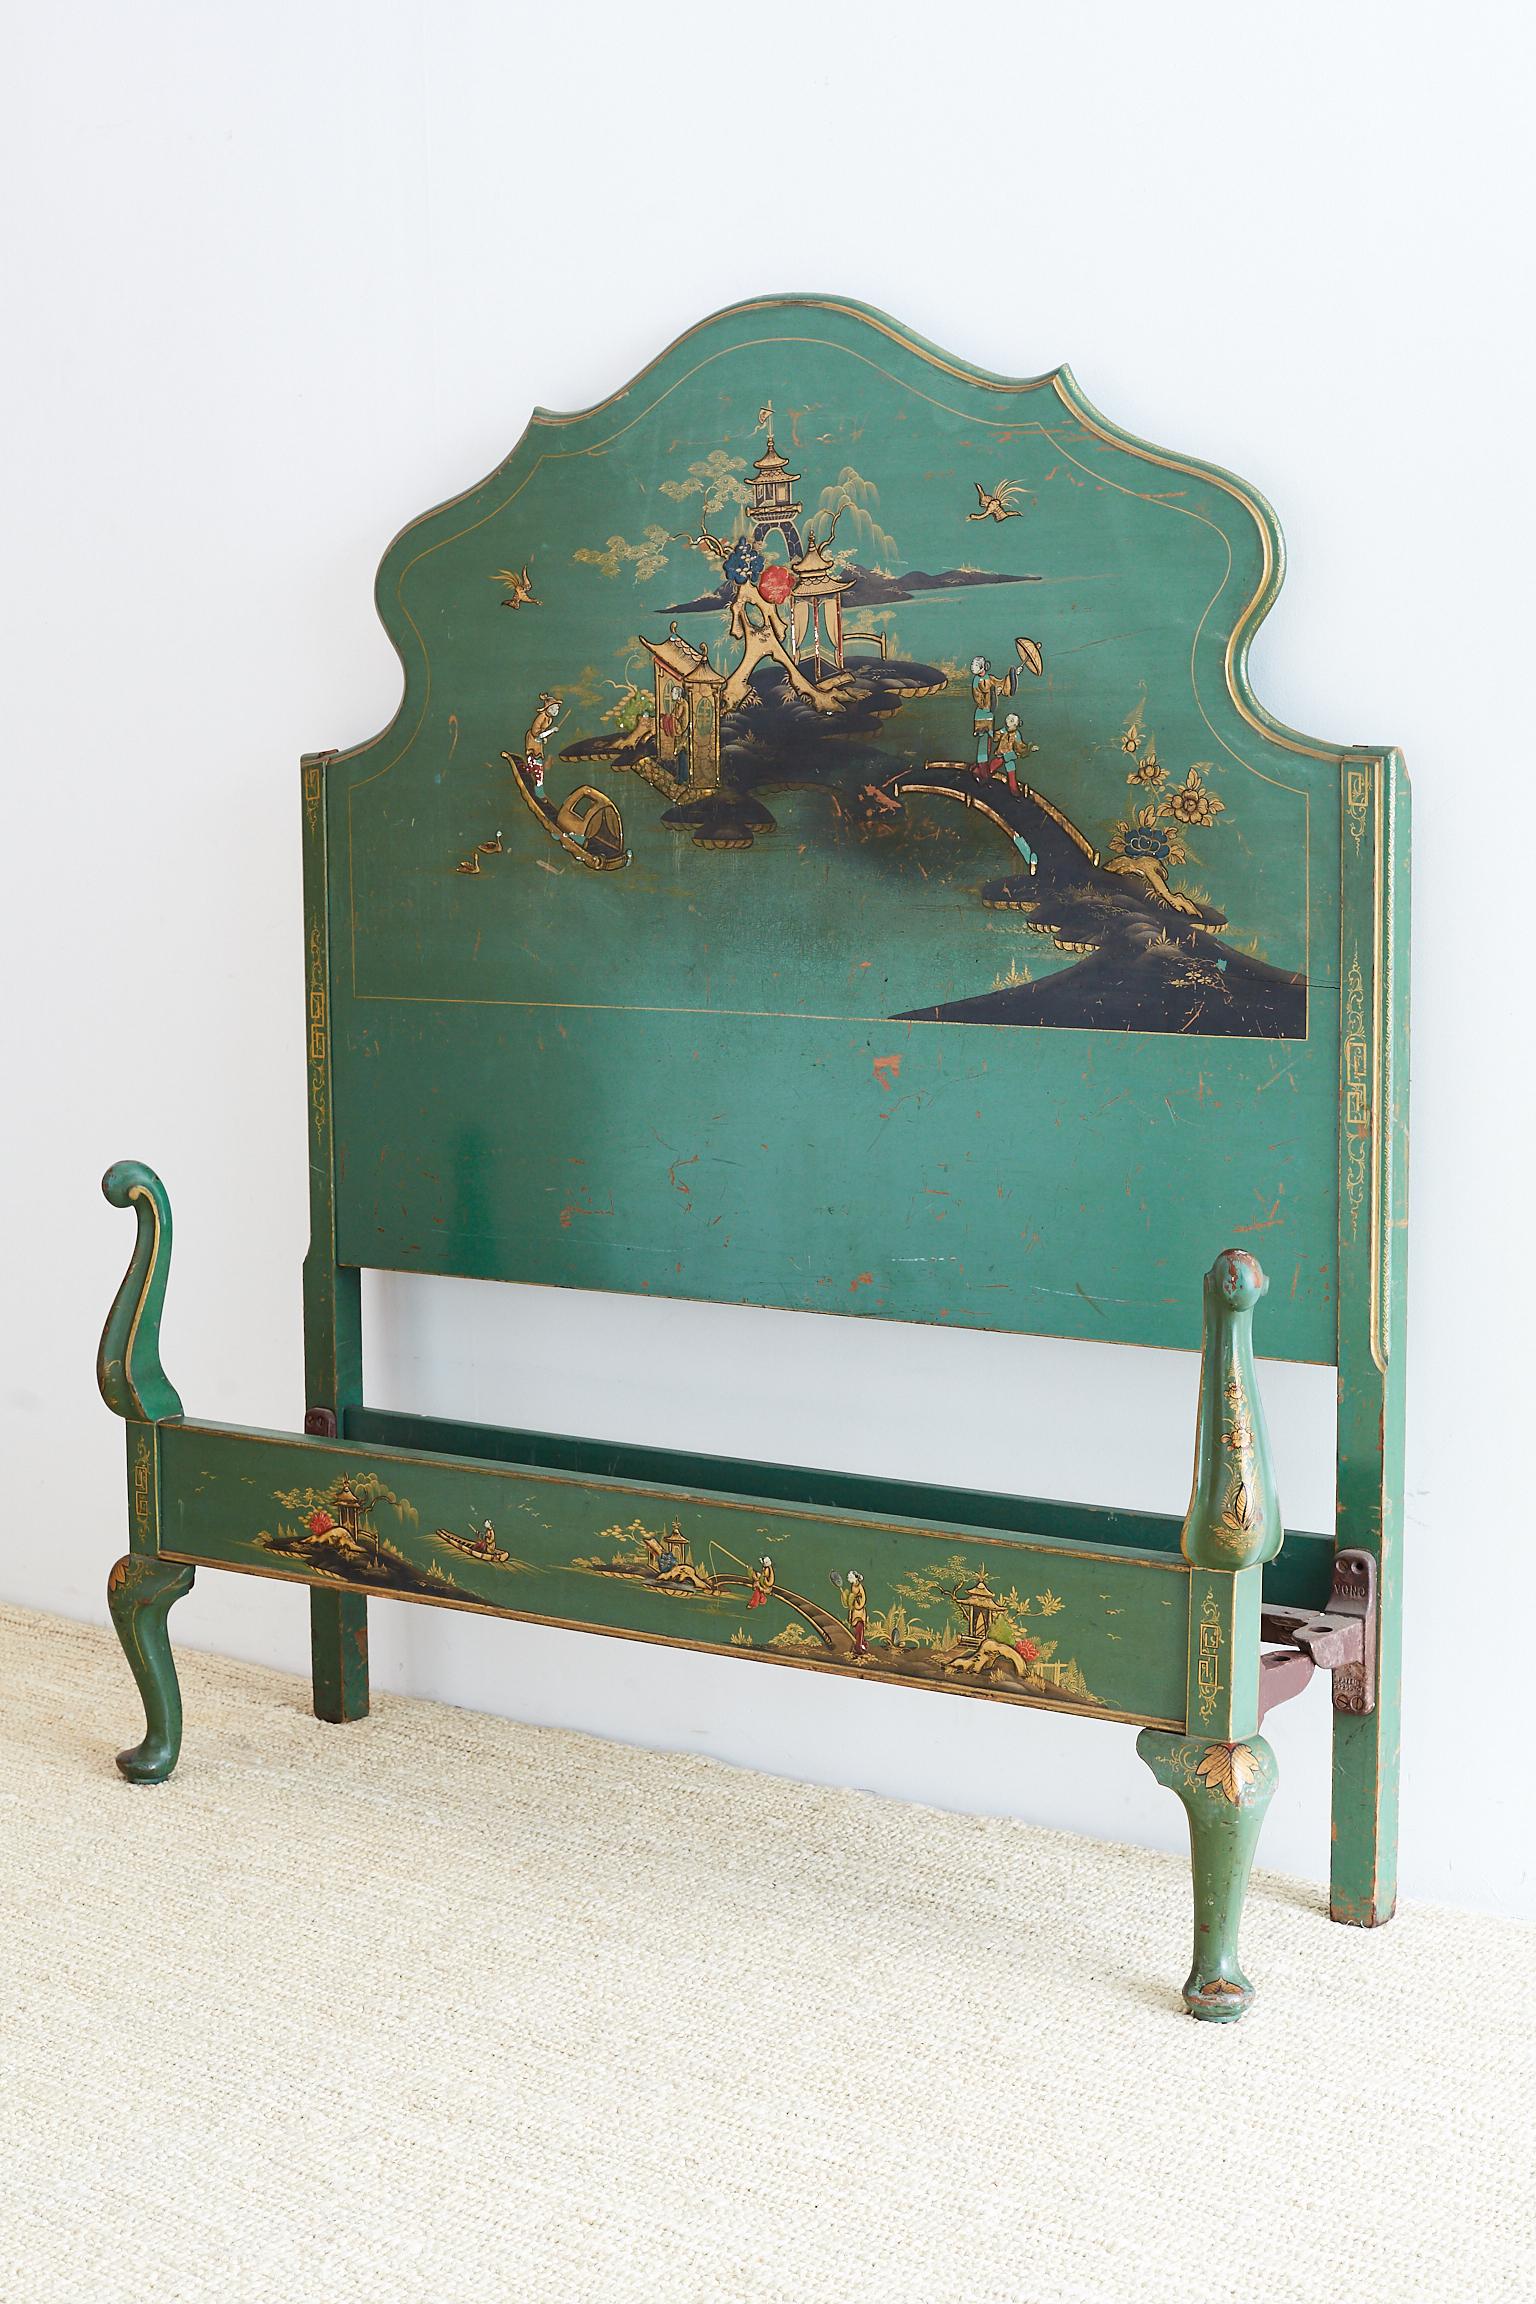 Marvelous English lacquered headboard and matching footboard made in the chinoiserie revival period of the early 20th century. Features idyllic landscape scenes of pagodas and gondolas on a river. The bed frame is decorated with gilt trim in a Greek